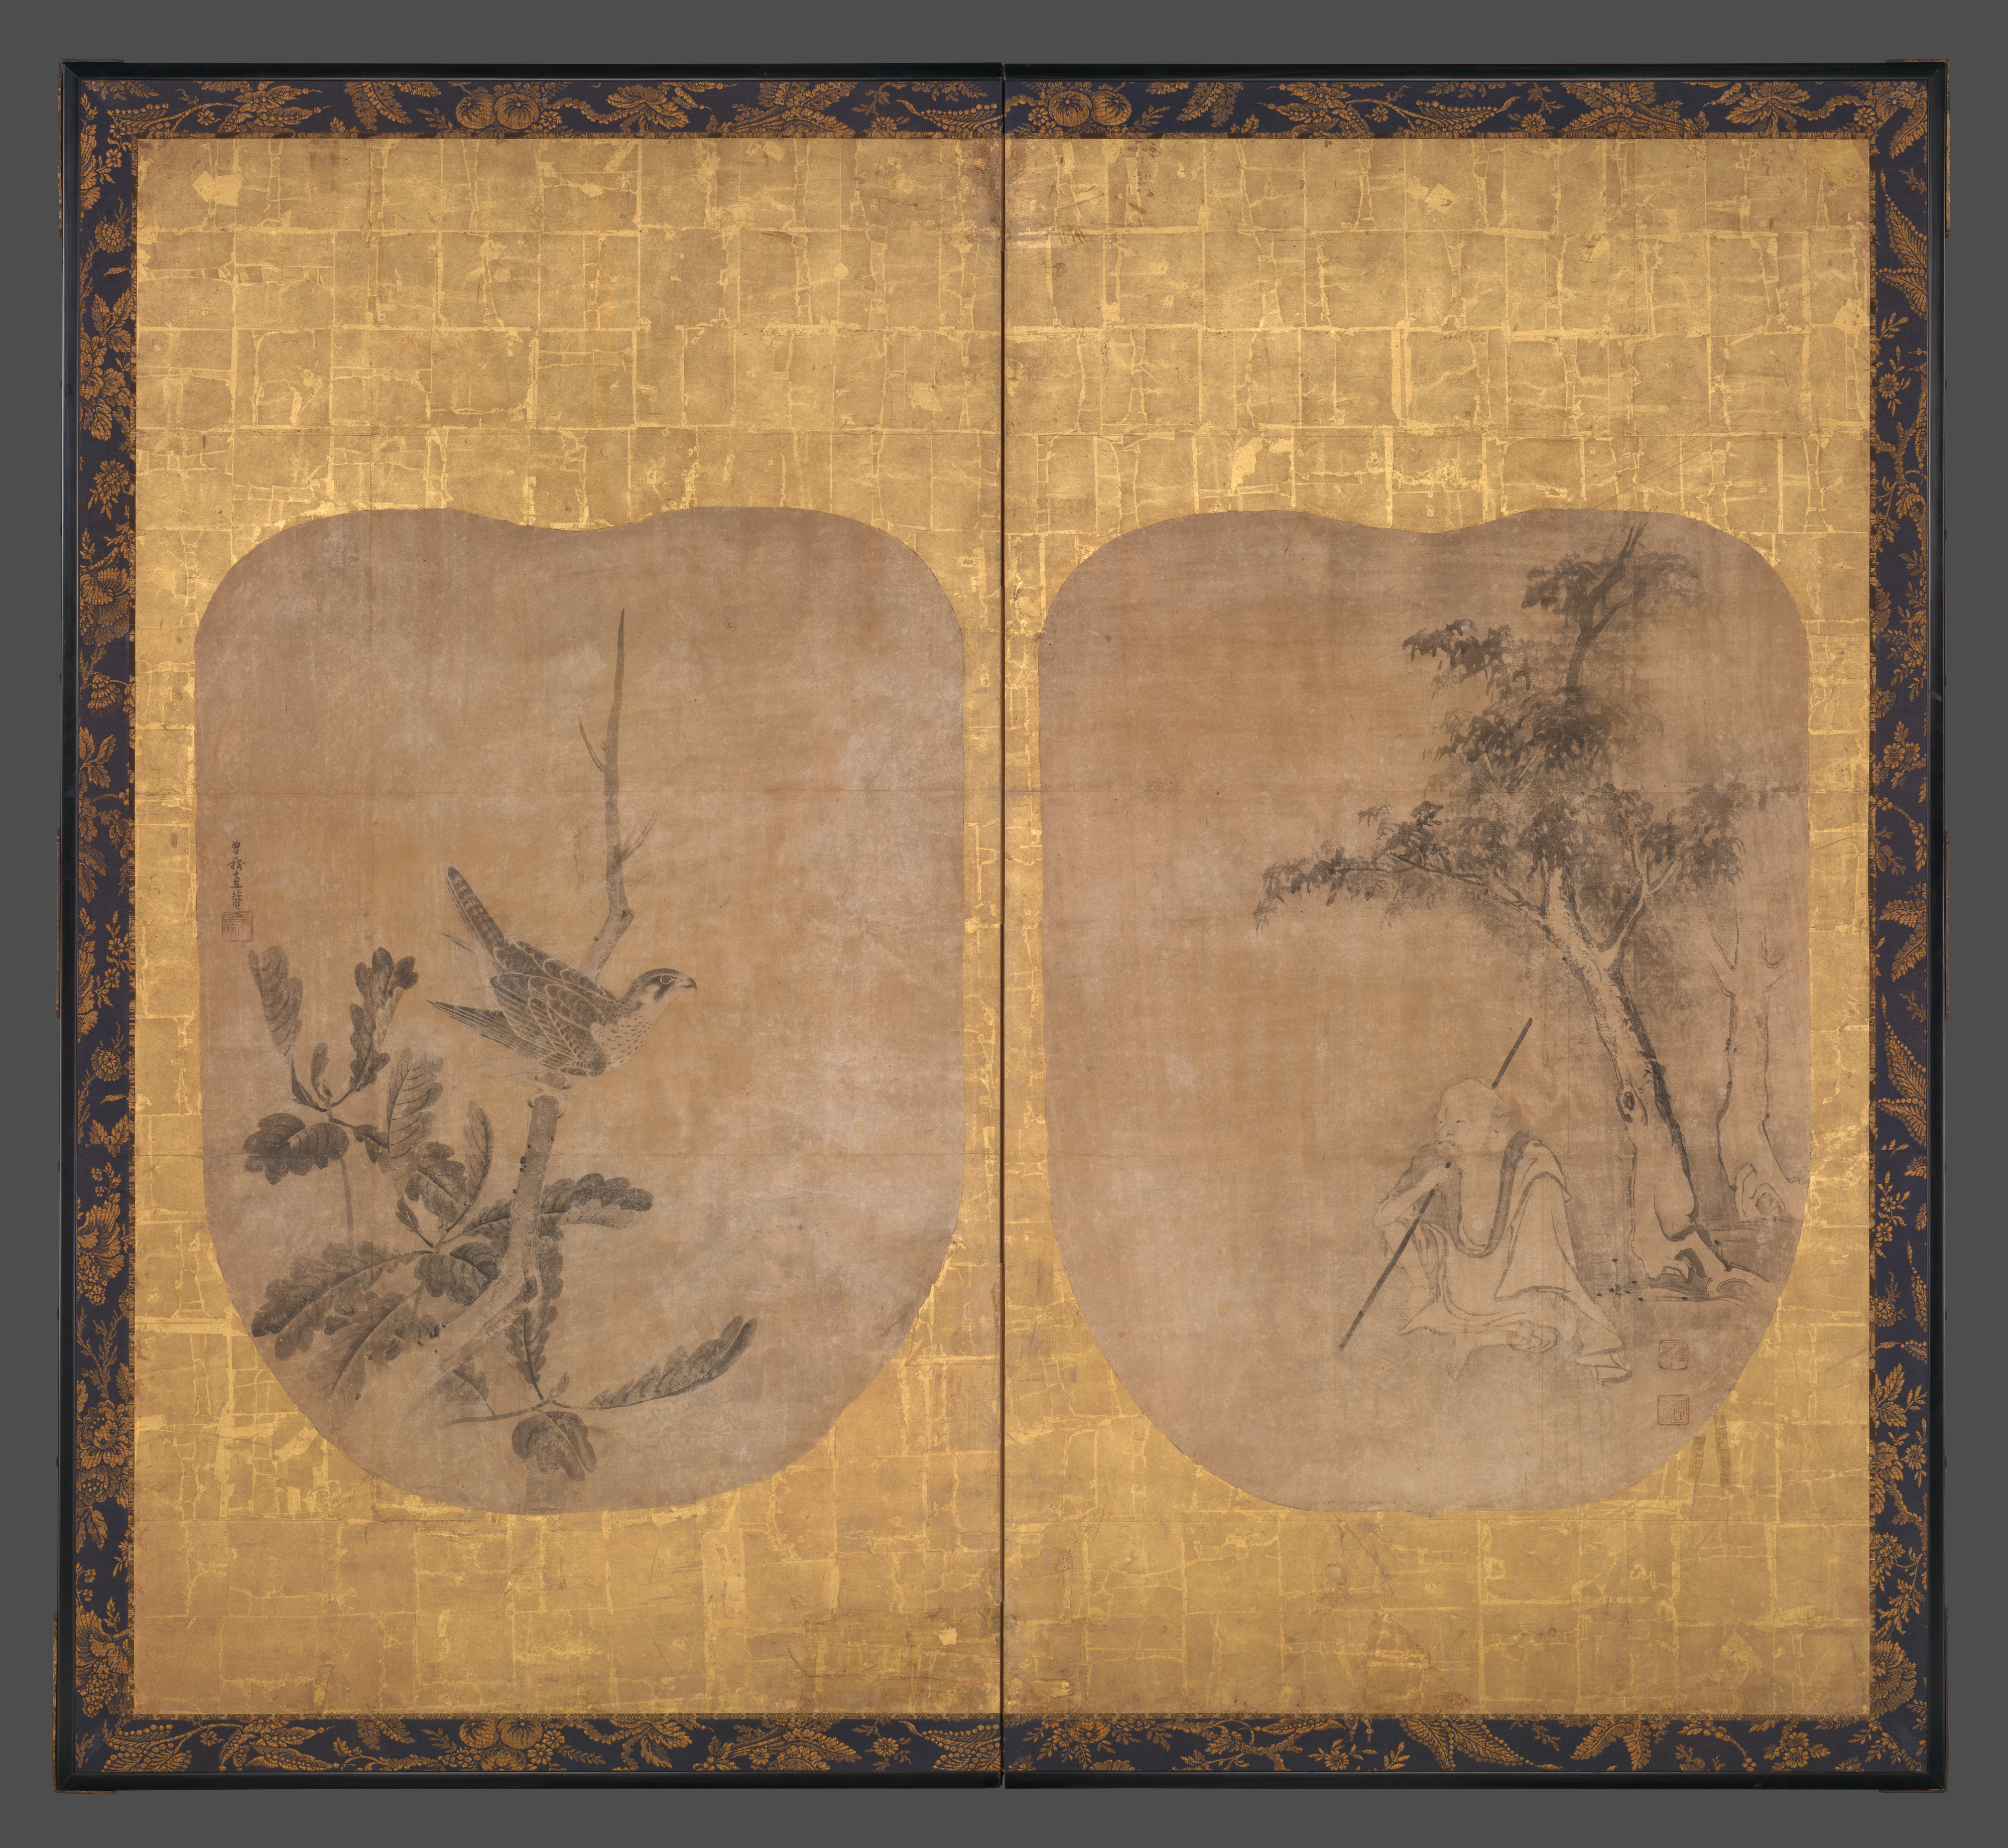 mid-17th century), Pair of fan-shaped paintings mounted on two-panel foldin...